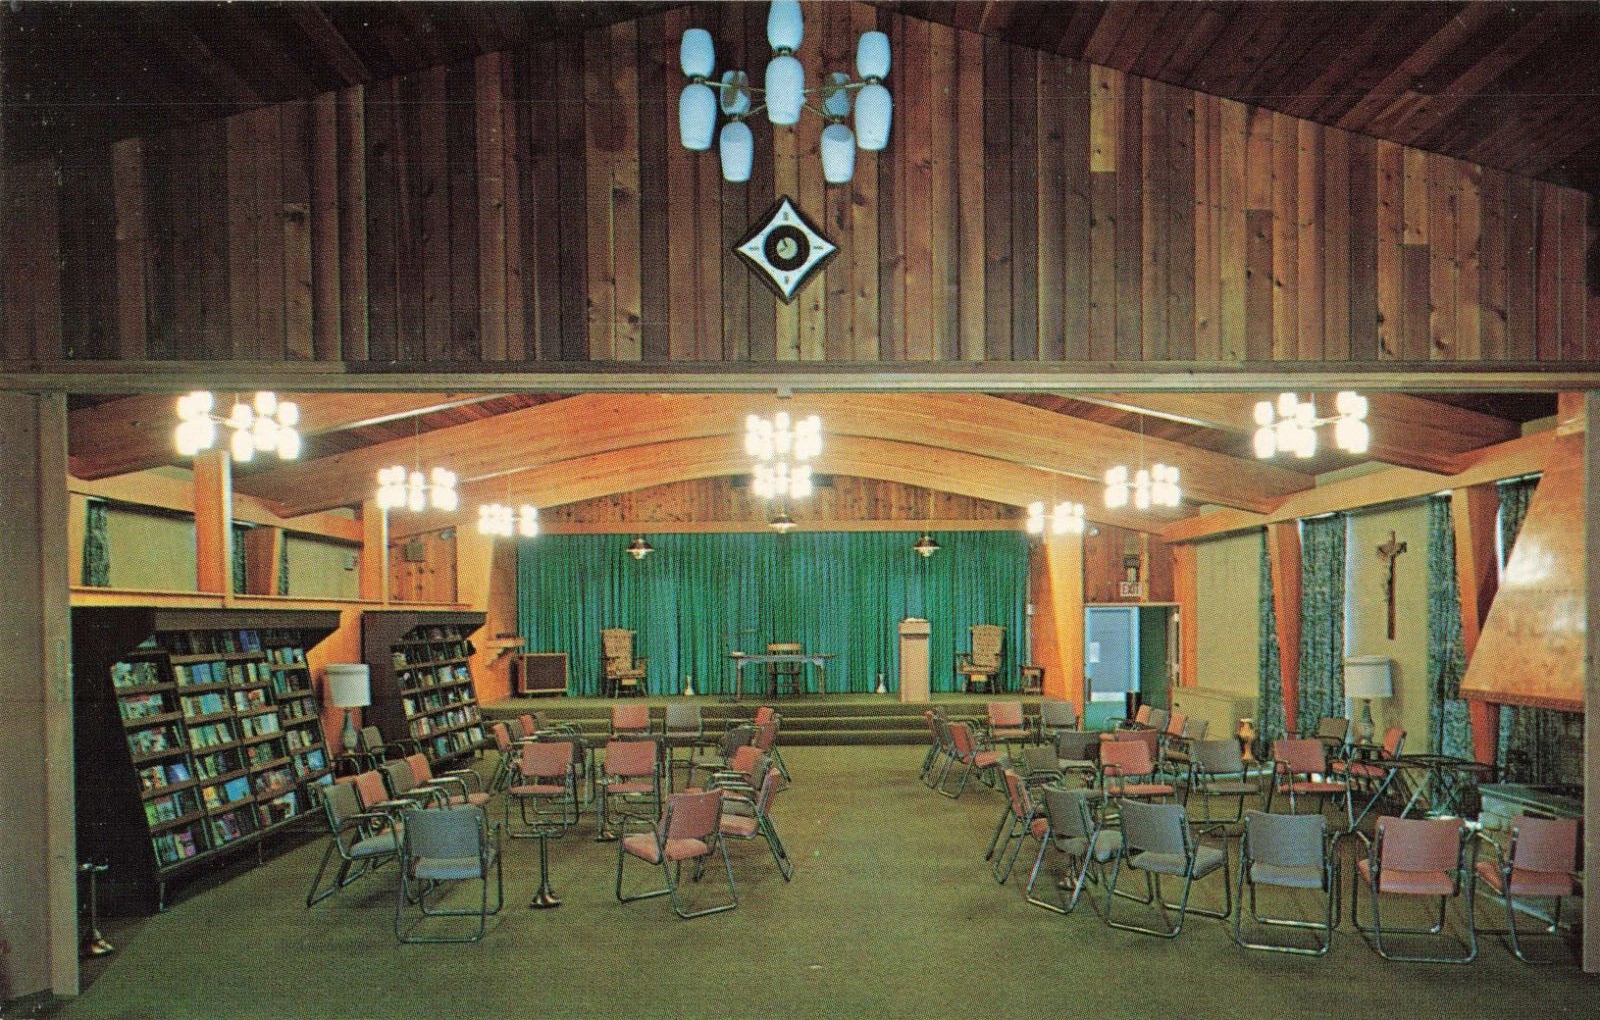 Augusta ME Maine, Oblate Retreat House Lounge & Lecture Hall, Vintage Postcard